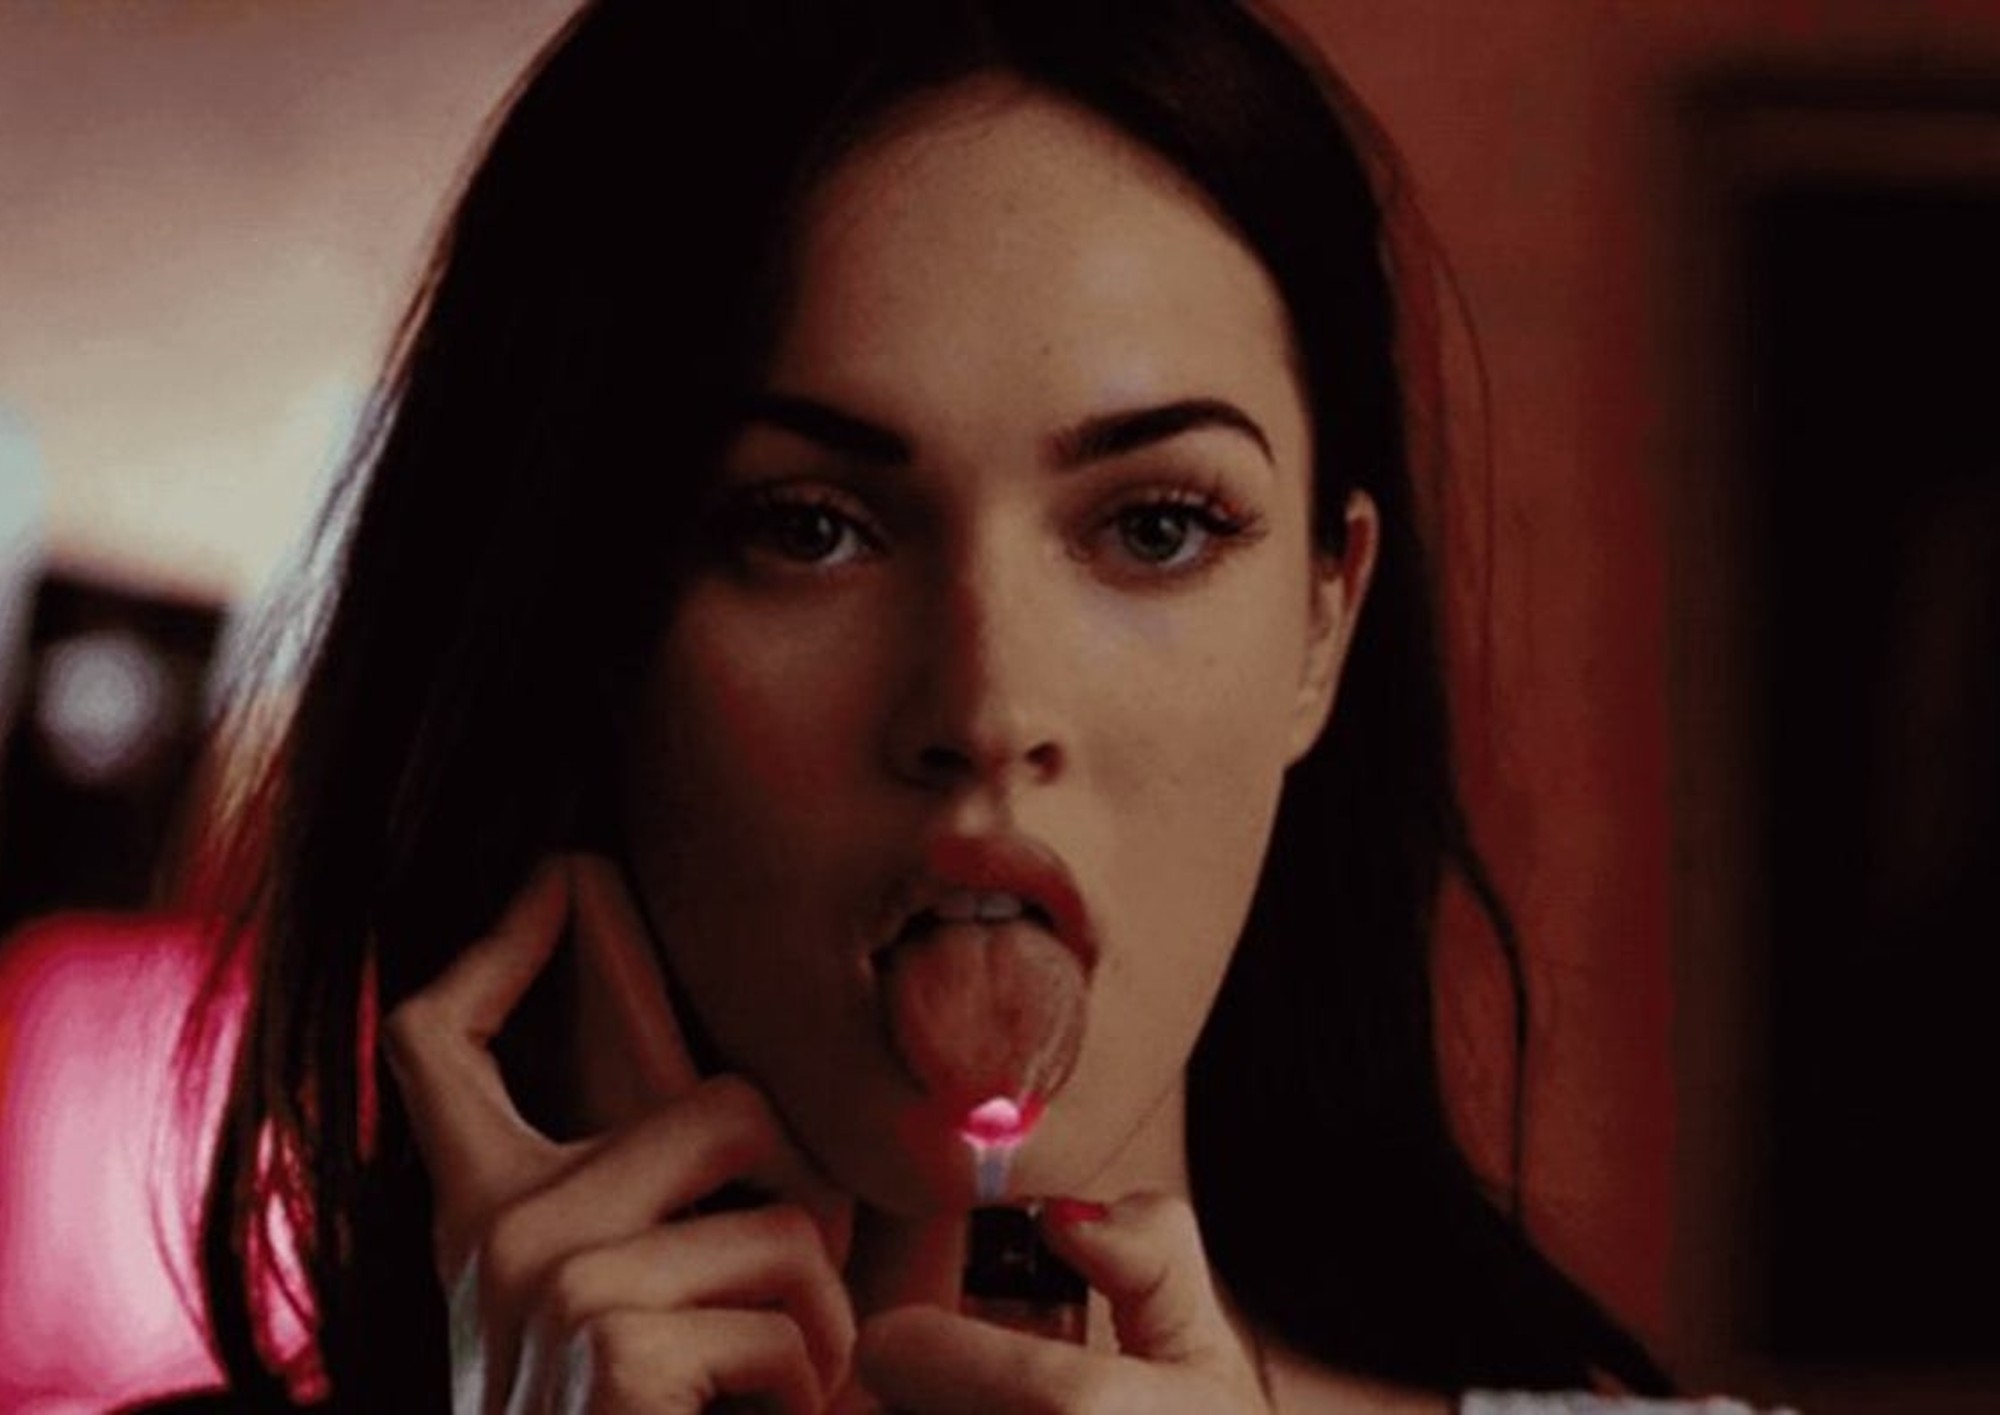 Image from the motion picture Jennifer's Body